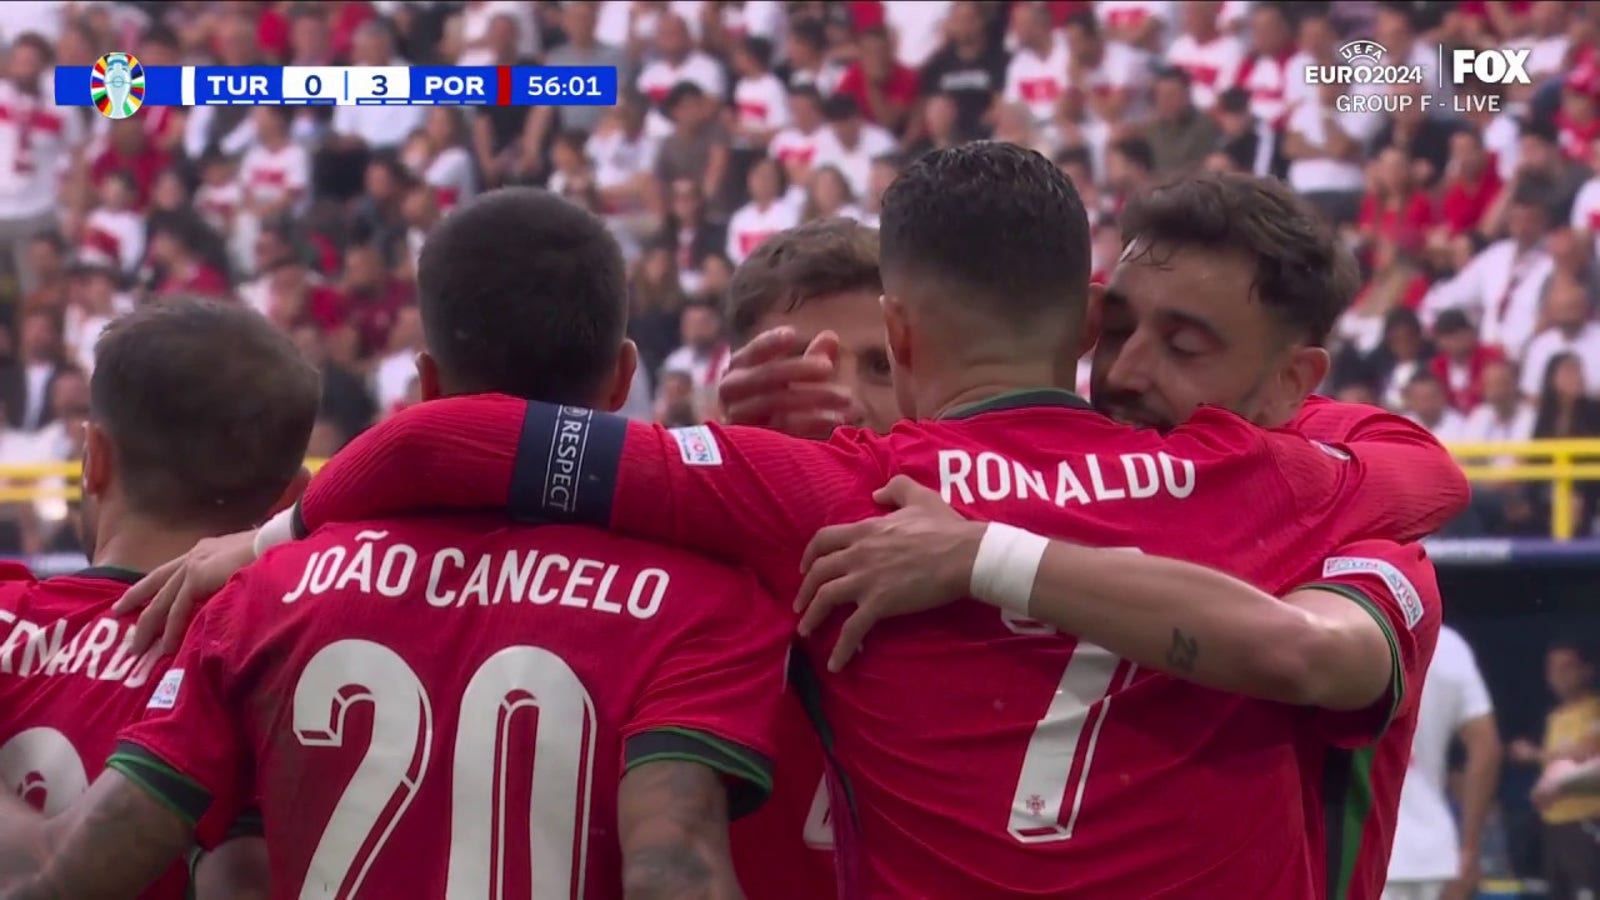 Cristiano Ronaldo sets up Bruno Fernandes who scores to give Portugal a 3-0 lead over Türkiye